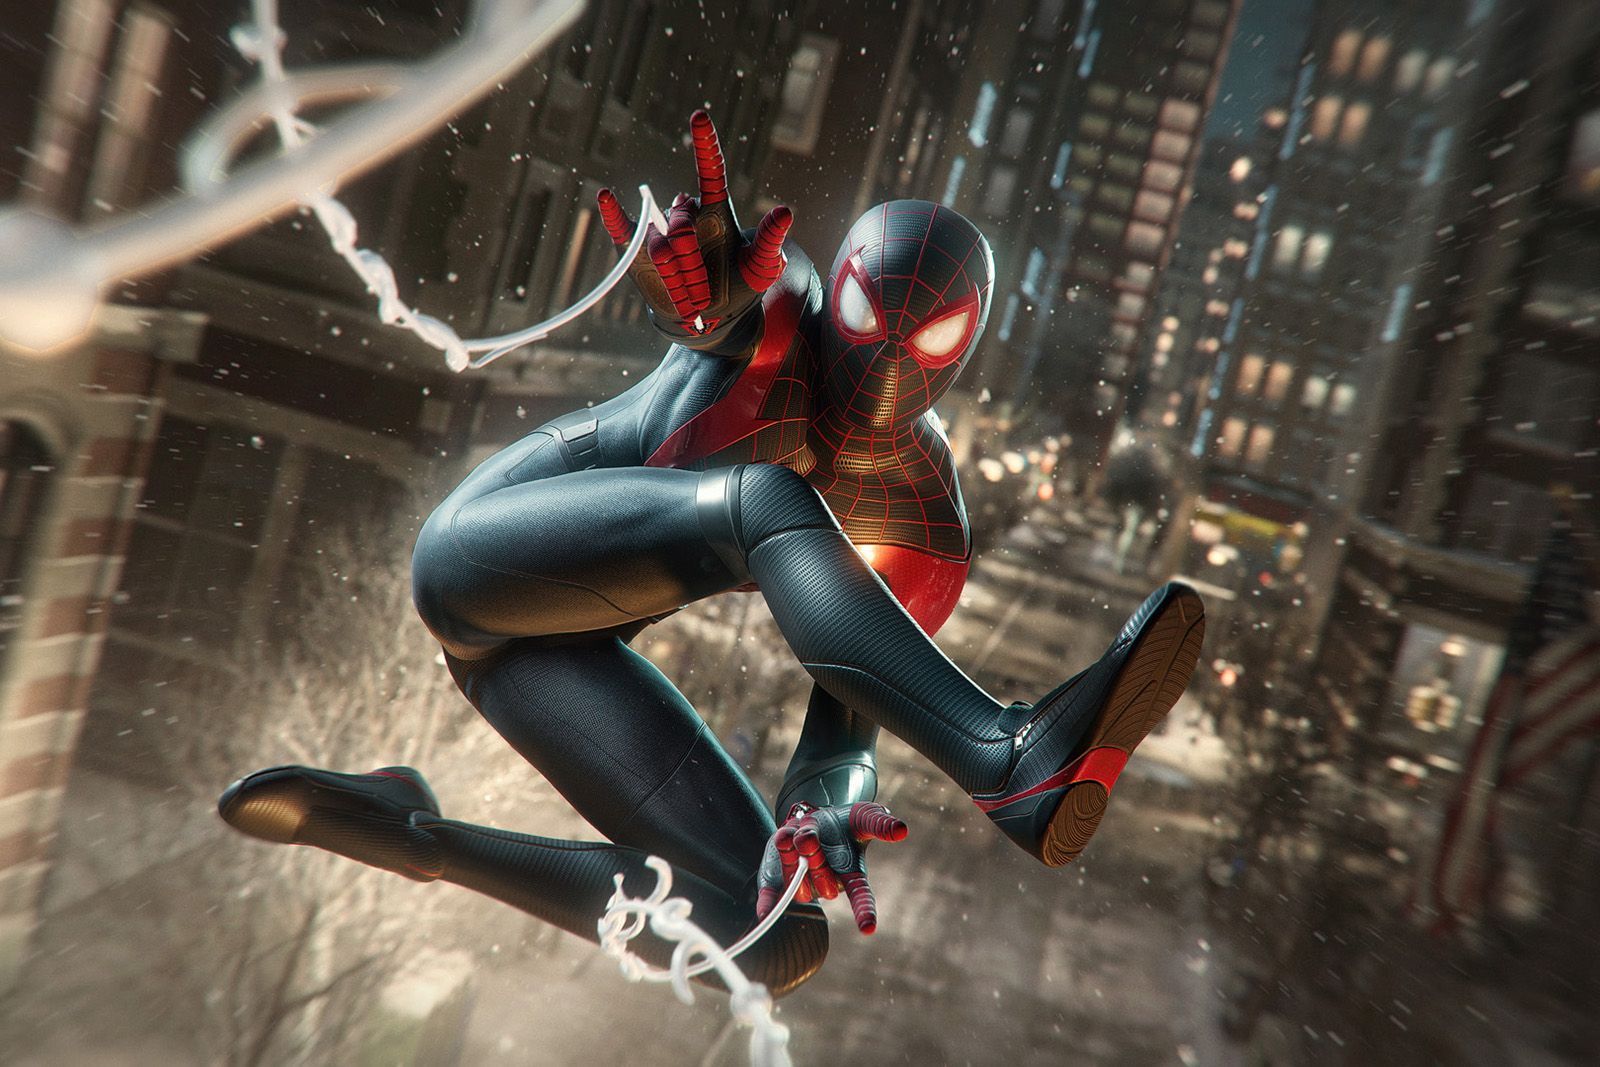 Spider-Man for PS4 listed as free for PlayStation Plus users